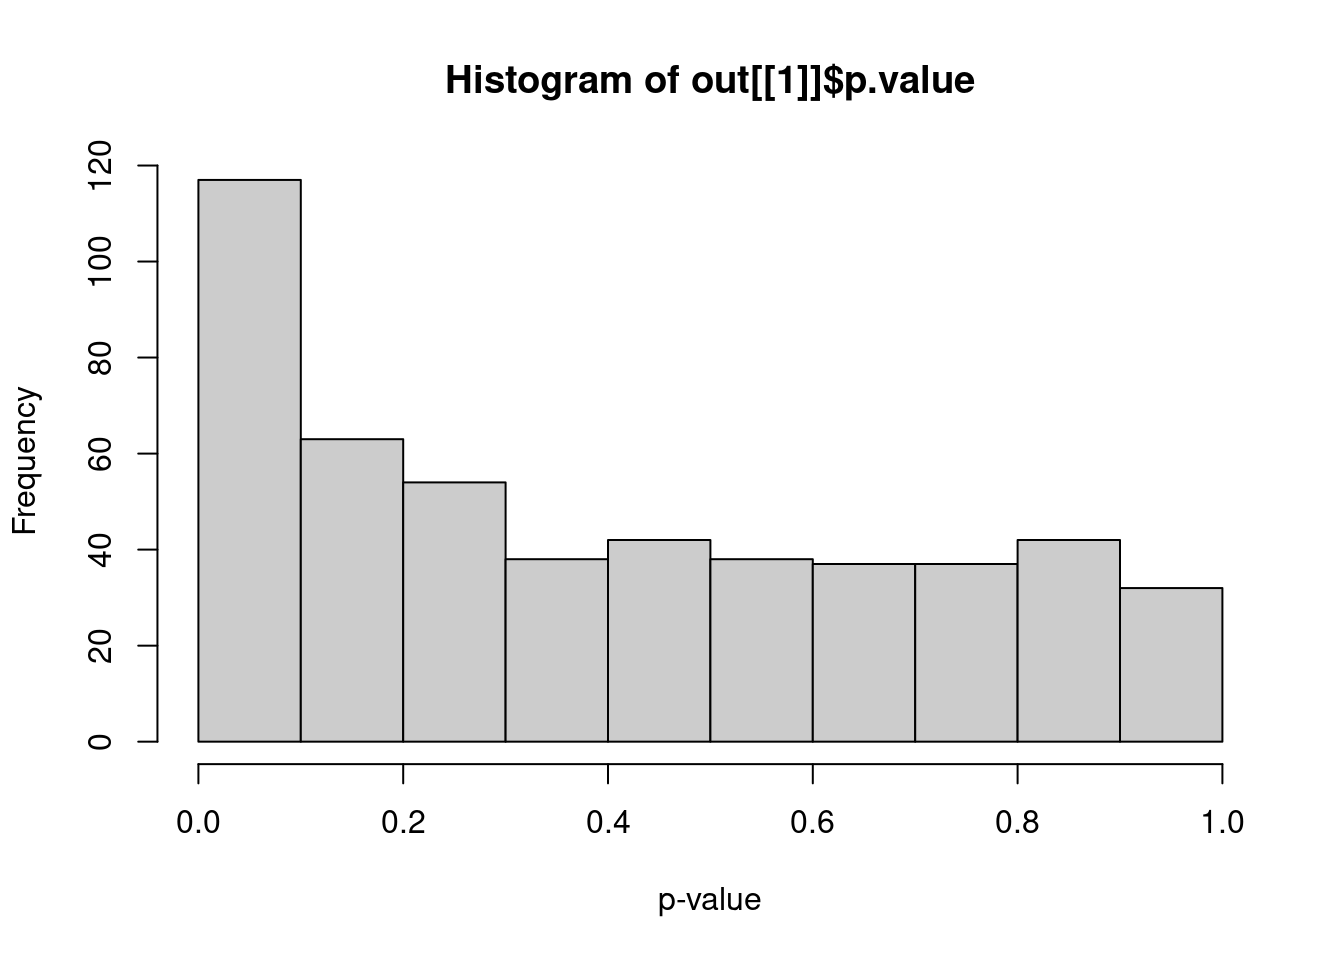 Distribution of $p$-values from a DE analysis between two clusters in a simulation with no true subpopulation structure.